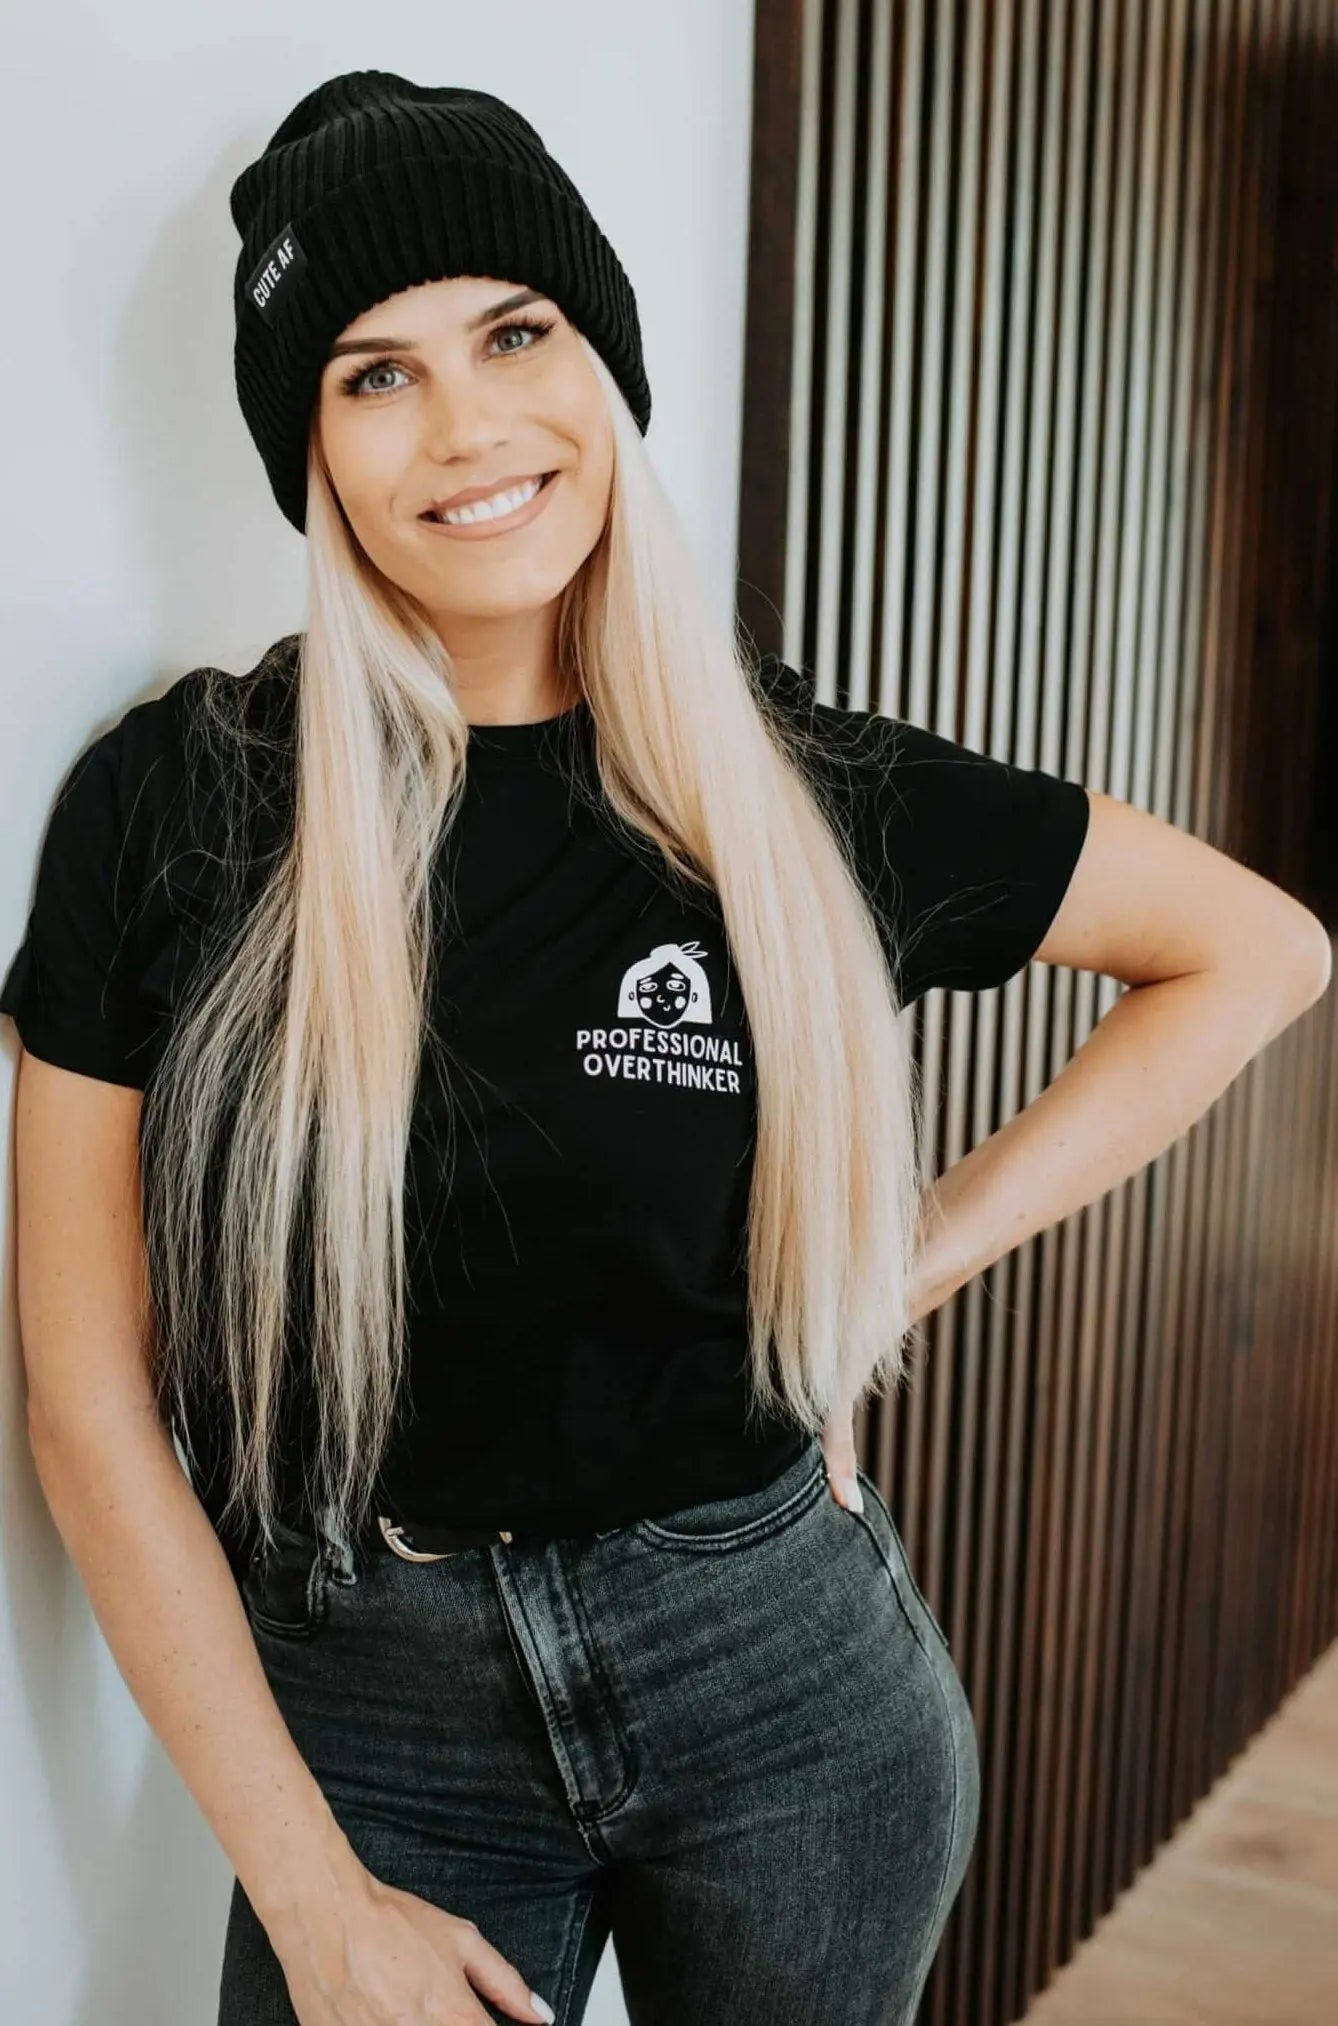 A woman in a black hat and shirt, featuring a close-up of a cartoon face. Product: Professional Overthinker T-shirt, oversized organic cotton with a printed message. Size chart included.